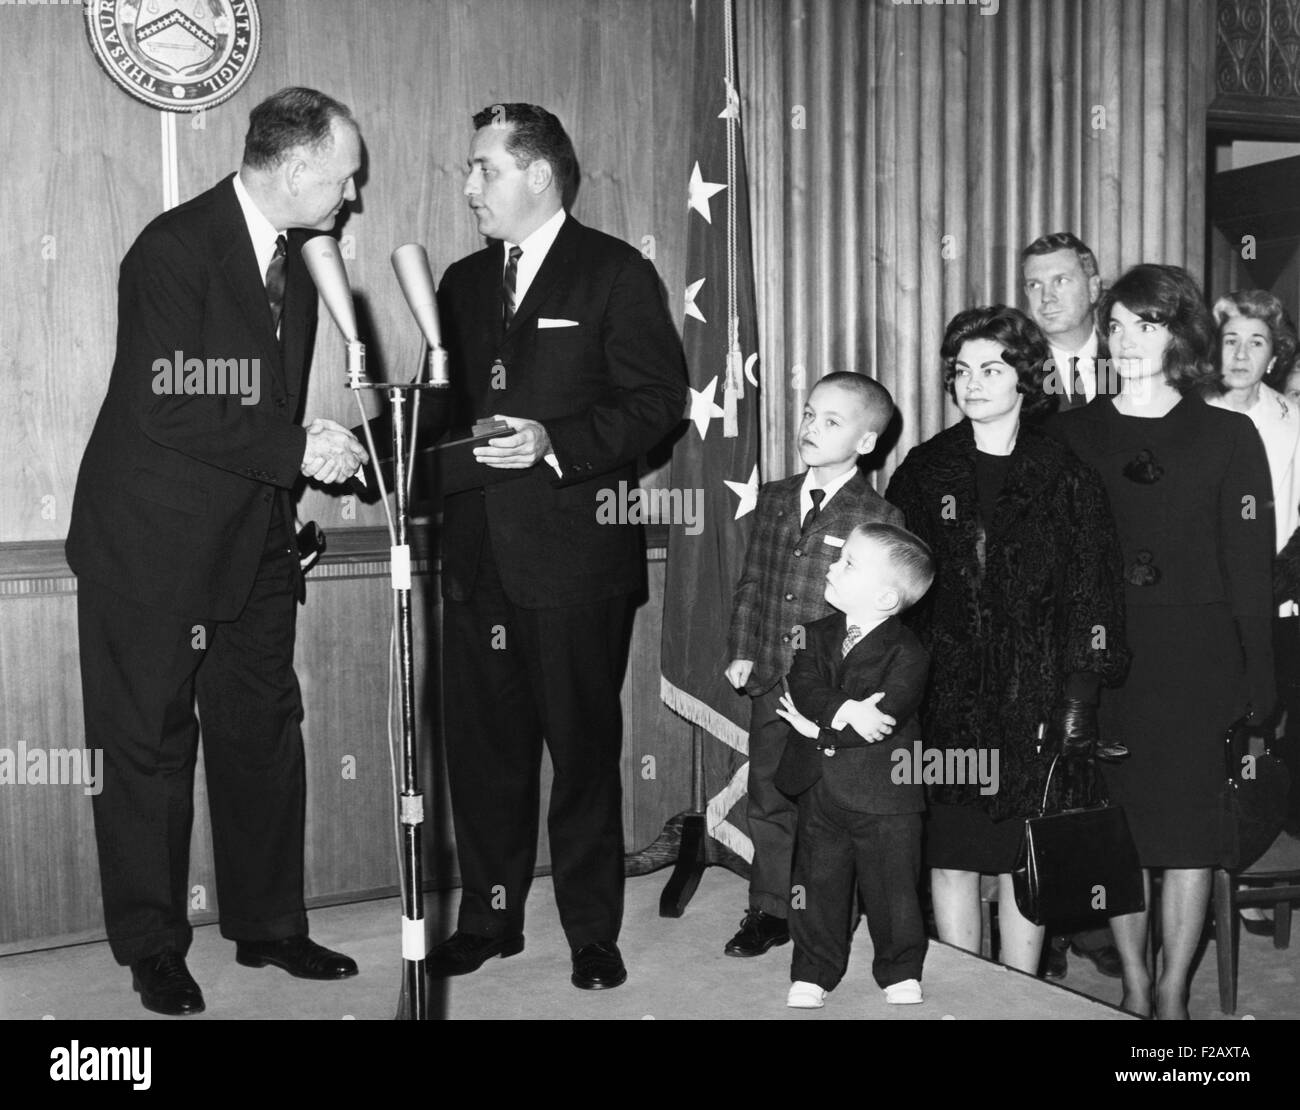 Secret Service agent Clinton Hill receives a citation for 'exceptional bravery'. At the scene of the Kennedy assassination in Dallas. He threw his body in front of the late President Kennedy and First Lady. L-R: Sec. Douglas Dillon, Clint Hill, Hill's sons Chris, 7 and Corey, 2; his wife Gwen, and Mrs. Jacqueline Kennedy. (CSU 2015 9 972) Stock Photo